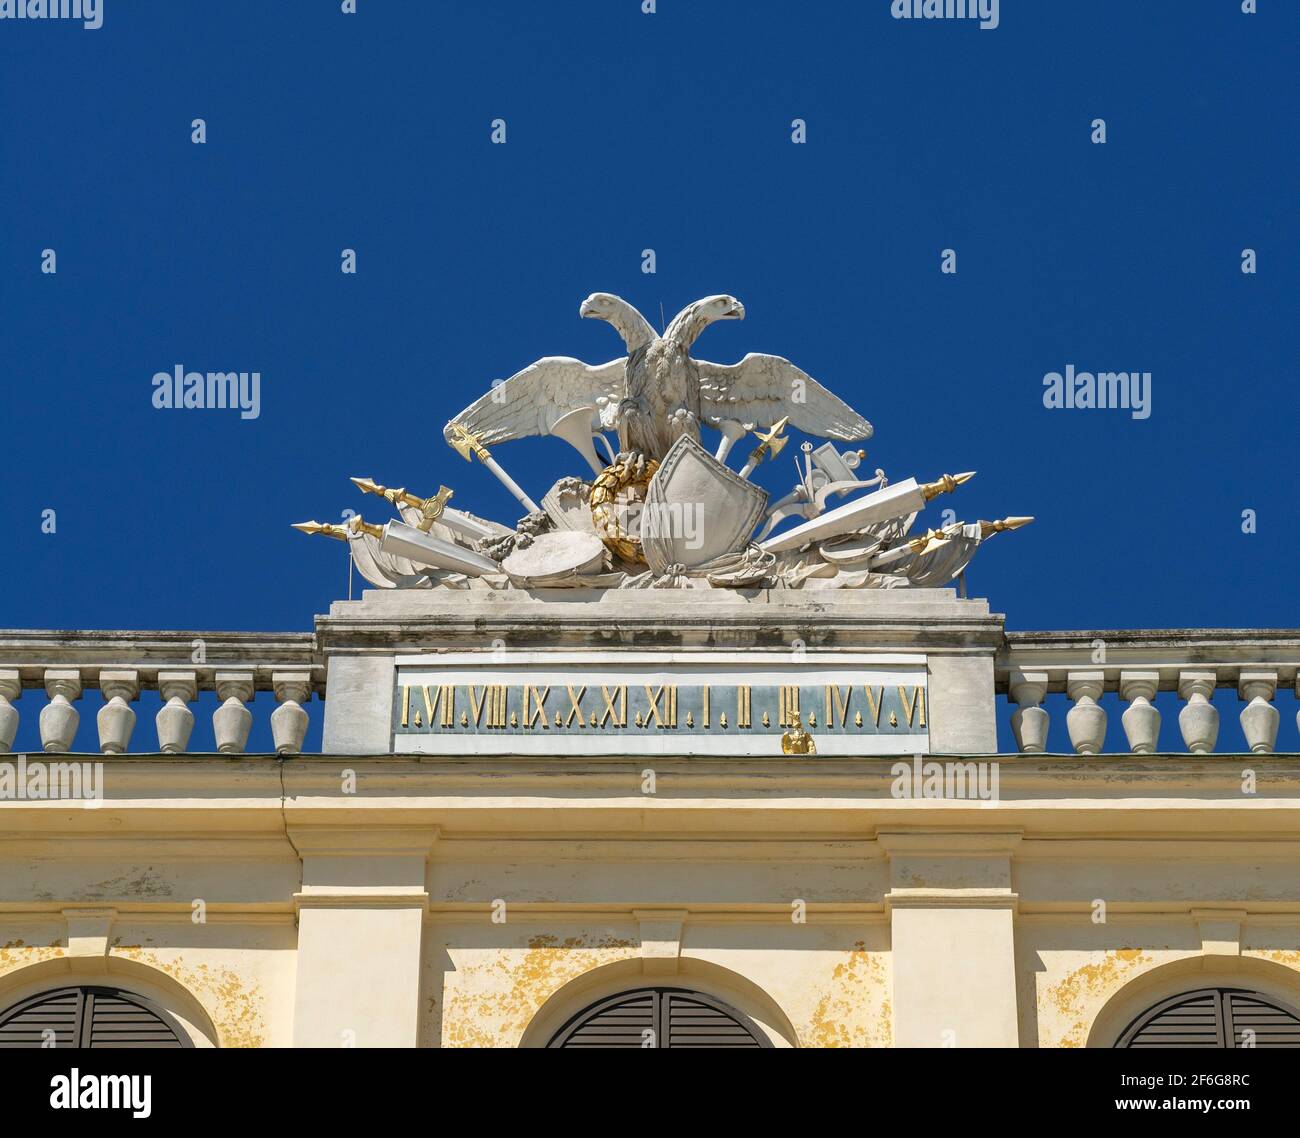 Schonbrunn Palace Clock: Facing the garden is an elaborate double eagle decorated linear clock high above the central garden door of this Vienna landmark. Stock Photo